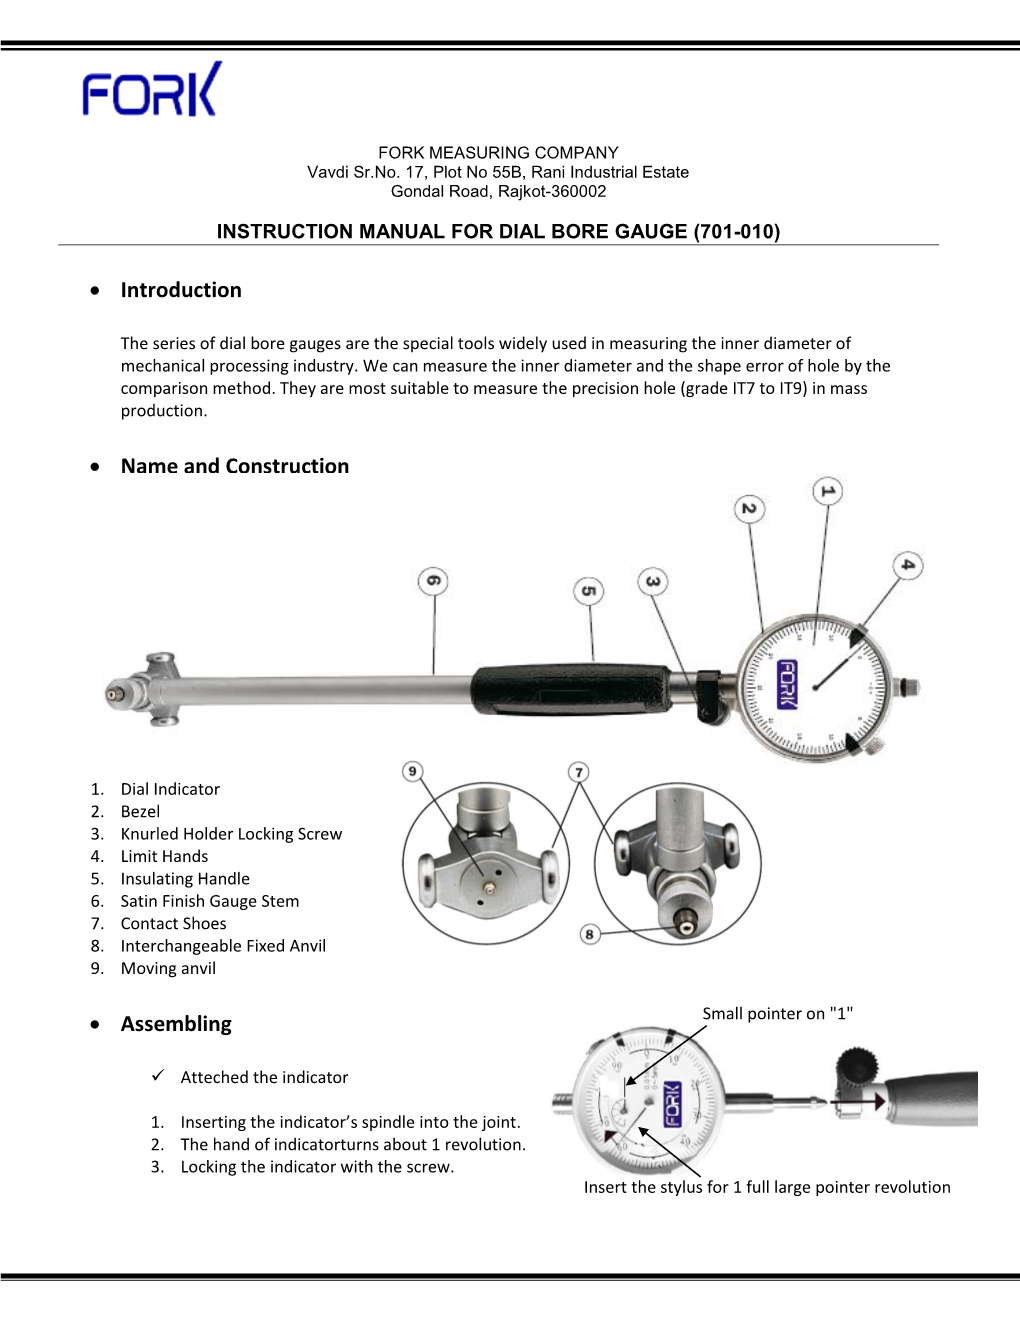 Instruction Manual for Dial Bore Gauge (701-010)